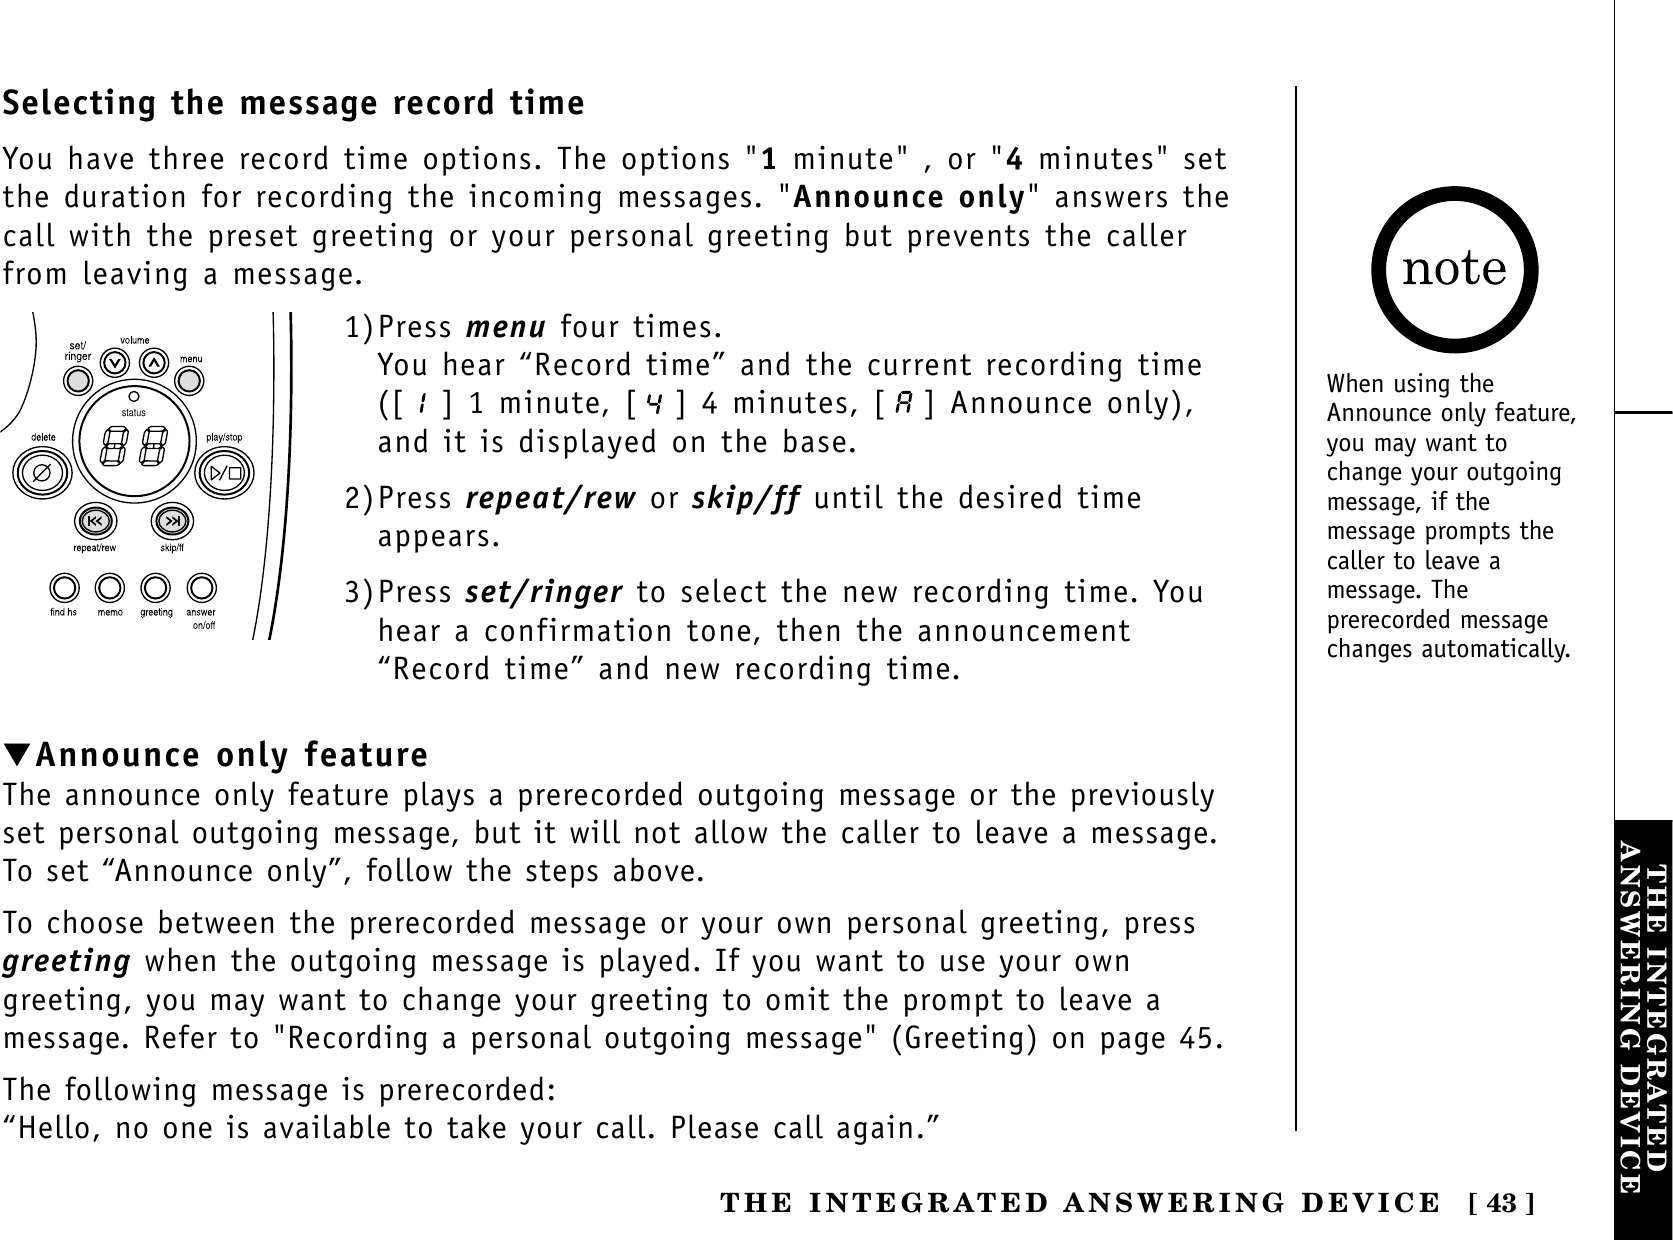 [ 43 ]THE INTEGRATEDANSWERING DEVICETHE INTEGRATED ANSWERING DEVICEstatus1)Press menu four times.You hear “Record time” and the current recording time([ ] 1 minute, [ ] 4 minutes, [ ] Announce only),and it is displayed on the base.2)Press repeat/rew or skip/ff until the desired timeappears.3)Press set/ringer to select the new recording time. Youhear a confirmation tone, then the announcement“Record time” and new recording time.▼Announce only featureThe announce only feature plays a prerecorded outgoing message or the previouslyset personal outgoing message, but it will not allow the caller to leave a message.To set “Announce only”, follow the steps above.To choose between the prerecorded message or your own personal greeting, pressgreeting when the outgoing message is played. If you want to use your owngreeting, you may want to change your greeting to omit the prompt to leave amessage. Refer to &quot;Recording a personal outgoing message&quot; (Greeting) on page 45.The following message is prerecorded:“Hello, no one is available to take your call. Please call again.”Selecting the message record timeYou have three record time options. The options &quot;1minute&quot; , or &quot;4minutes&quot; setthe duration for recording the incoming messages. &quot;Announce only&quot; answers thecall with the preset greeting or your personal greeting but prevents the callerfrom leaving a message. When using theAnnounce only feature,you may want tochange your outgoingmessage, if themessage prompts thecaller to leave amessage. Theprerecorded messagechanges automatically.